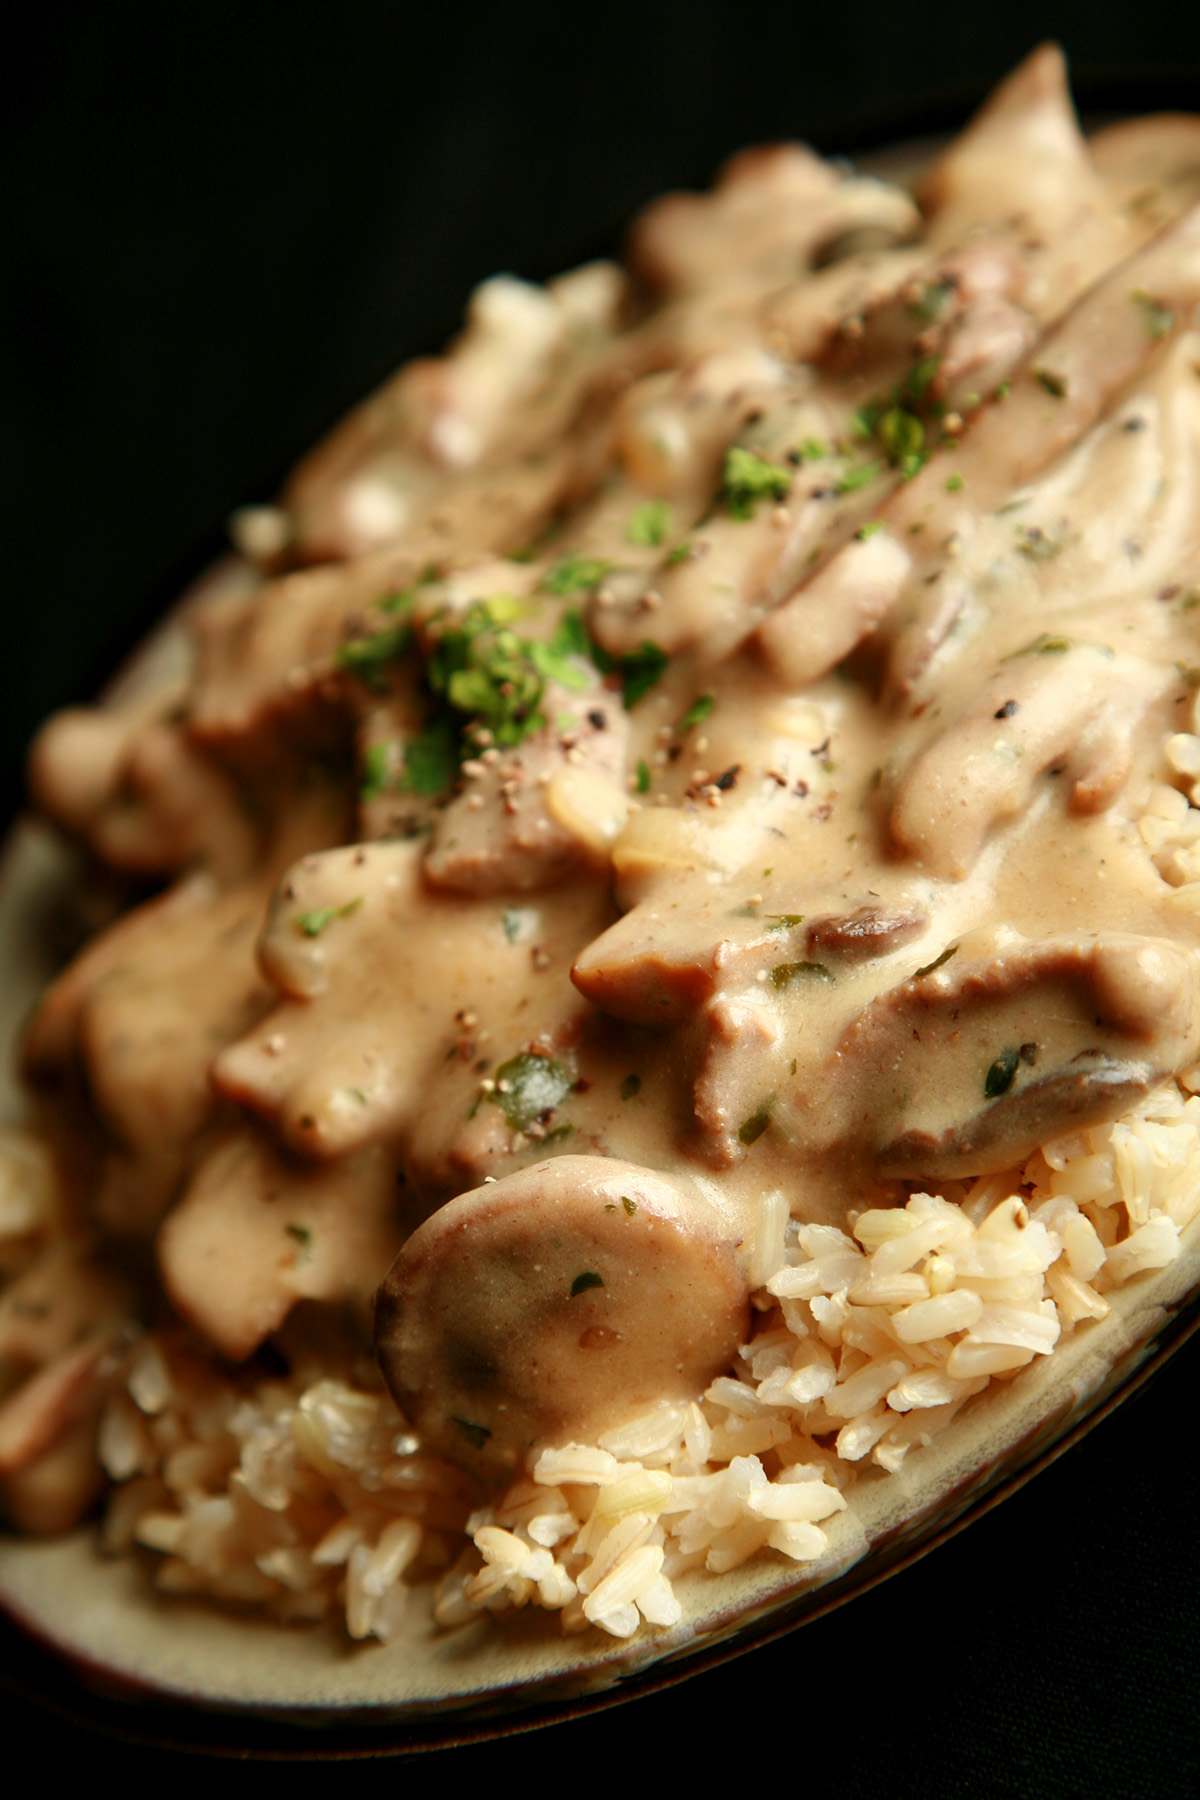 A plate of gluten-free beef stroganoff over rice.